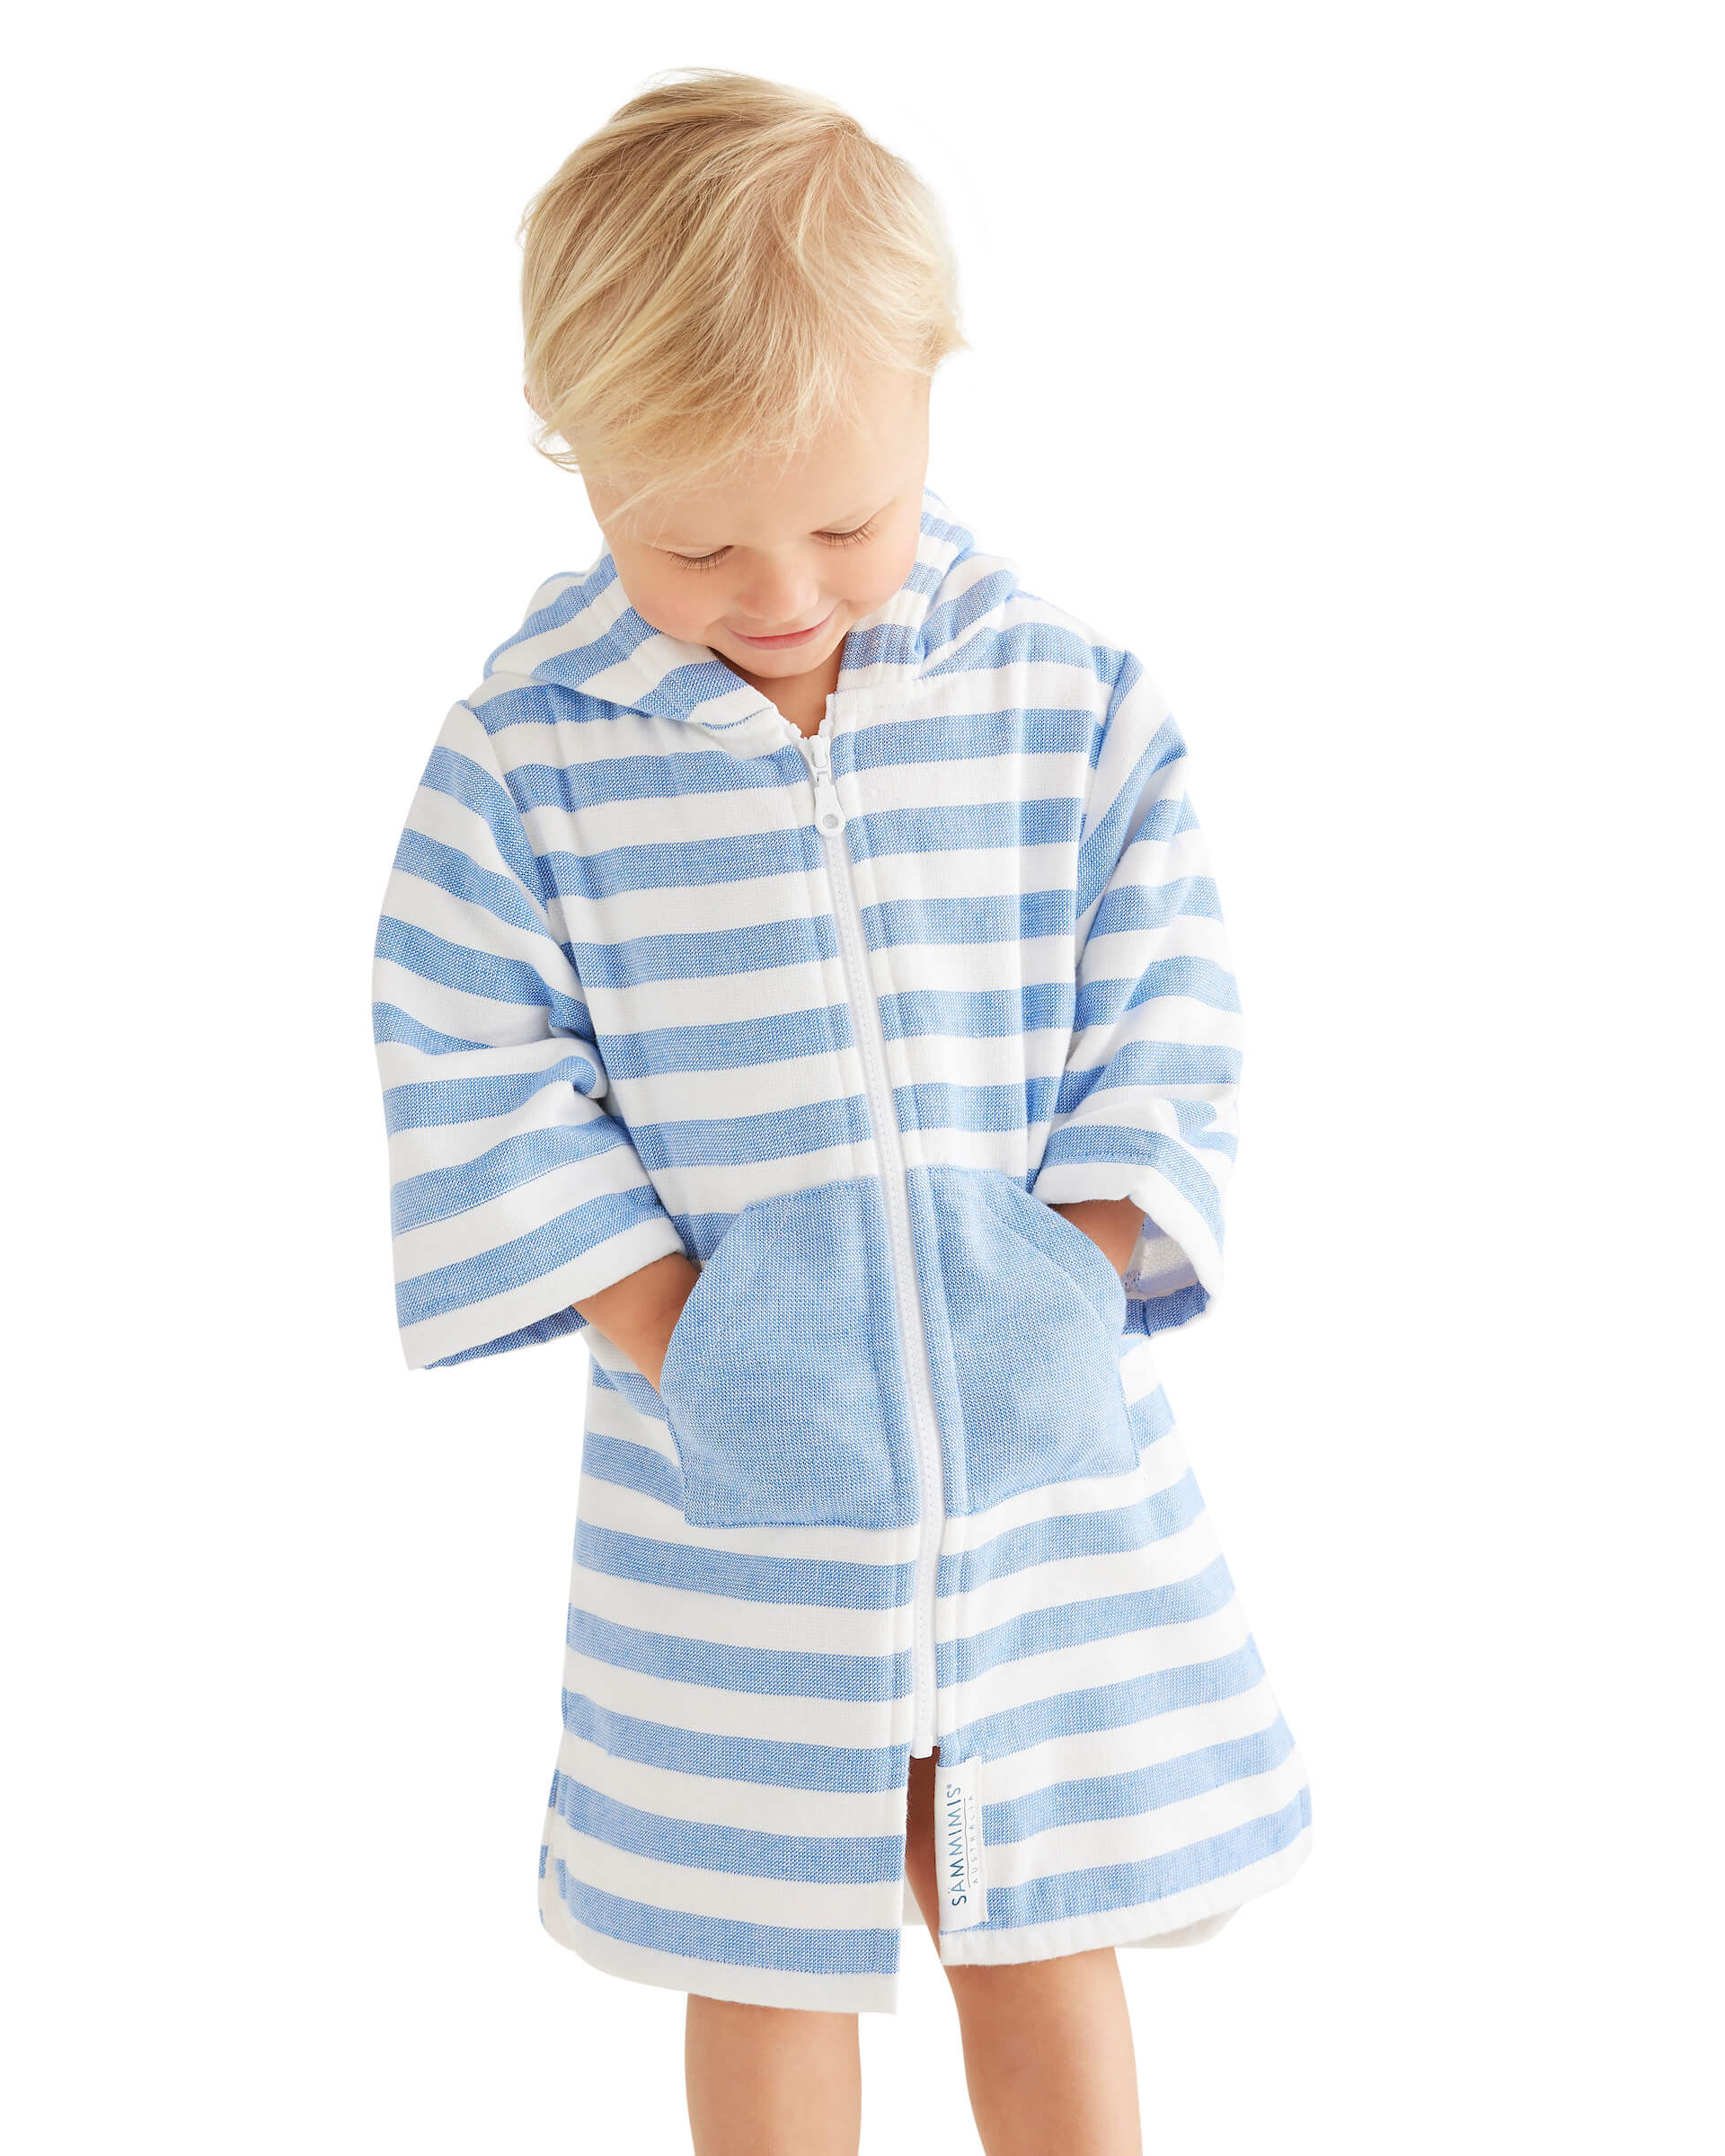 MENORCA Baby Terry Hooded Towel: Royal Blue/White